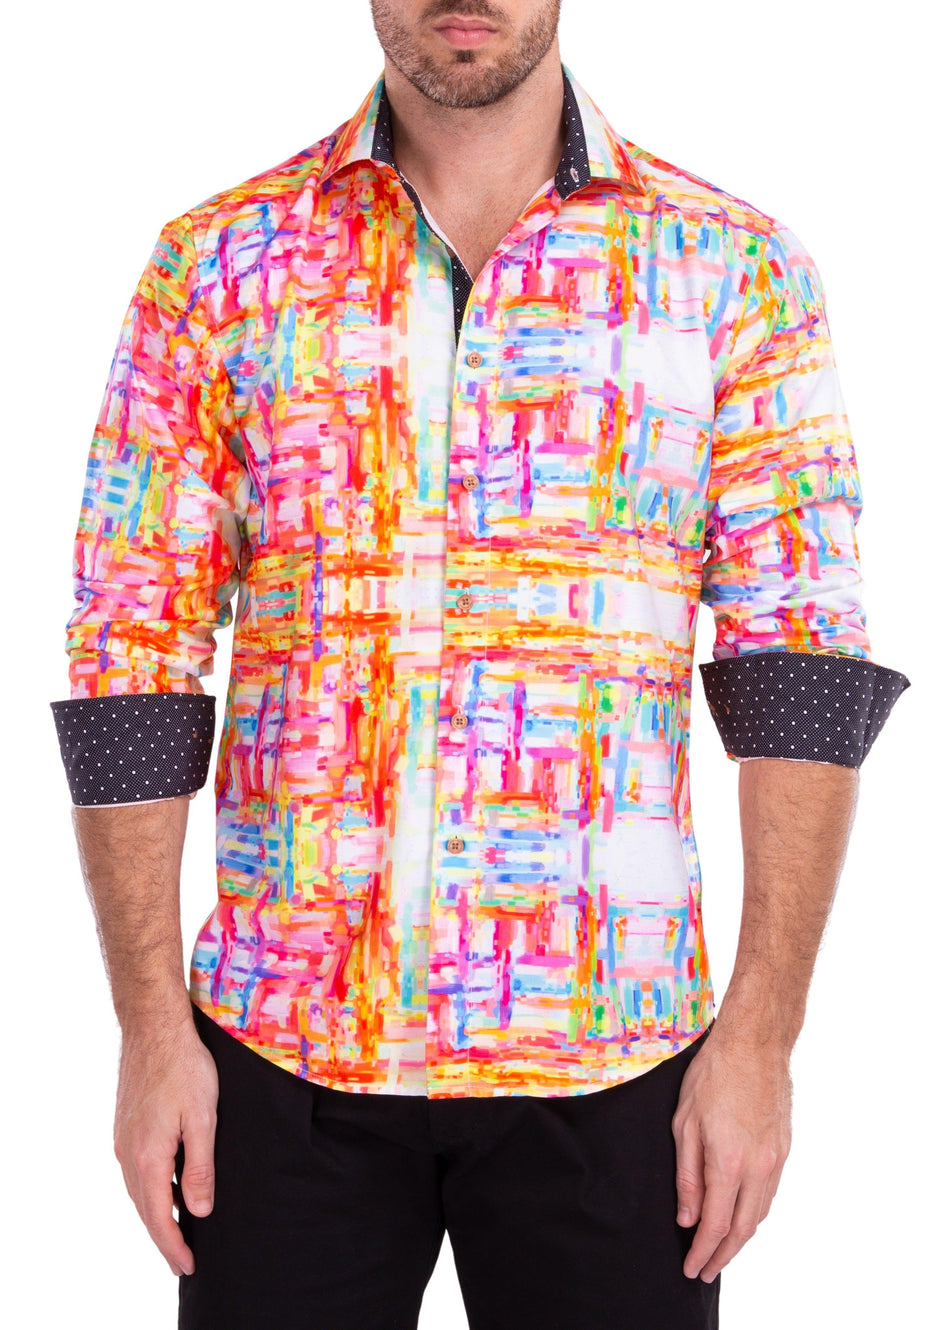 Vibrant Watercolor Abstract Printed White Button Up Long Sleeve Dress Shirt